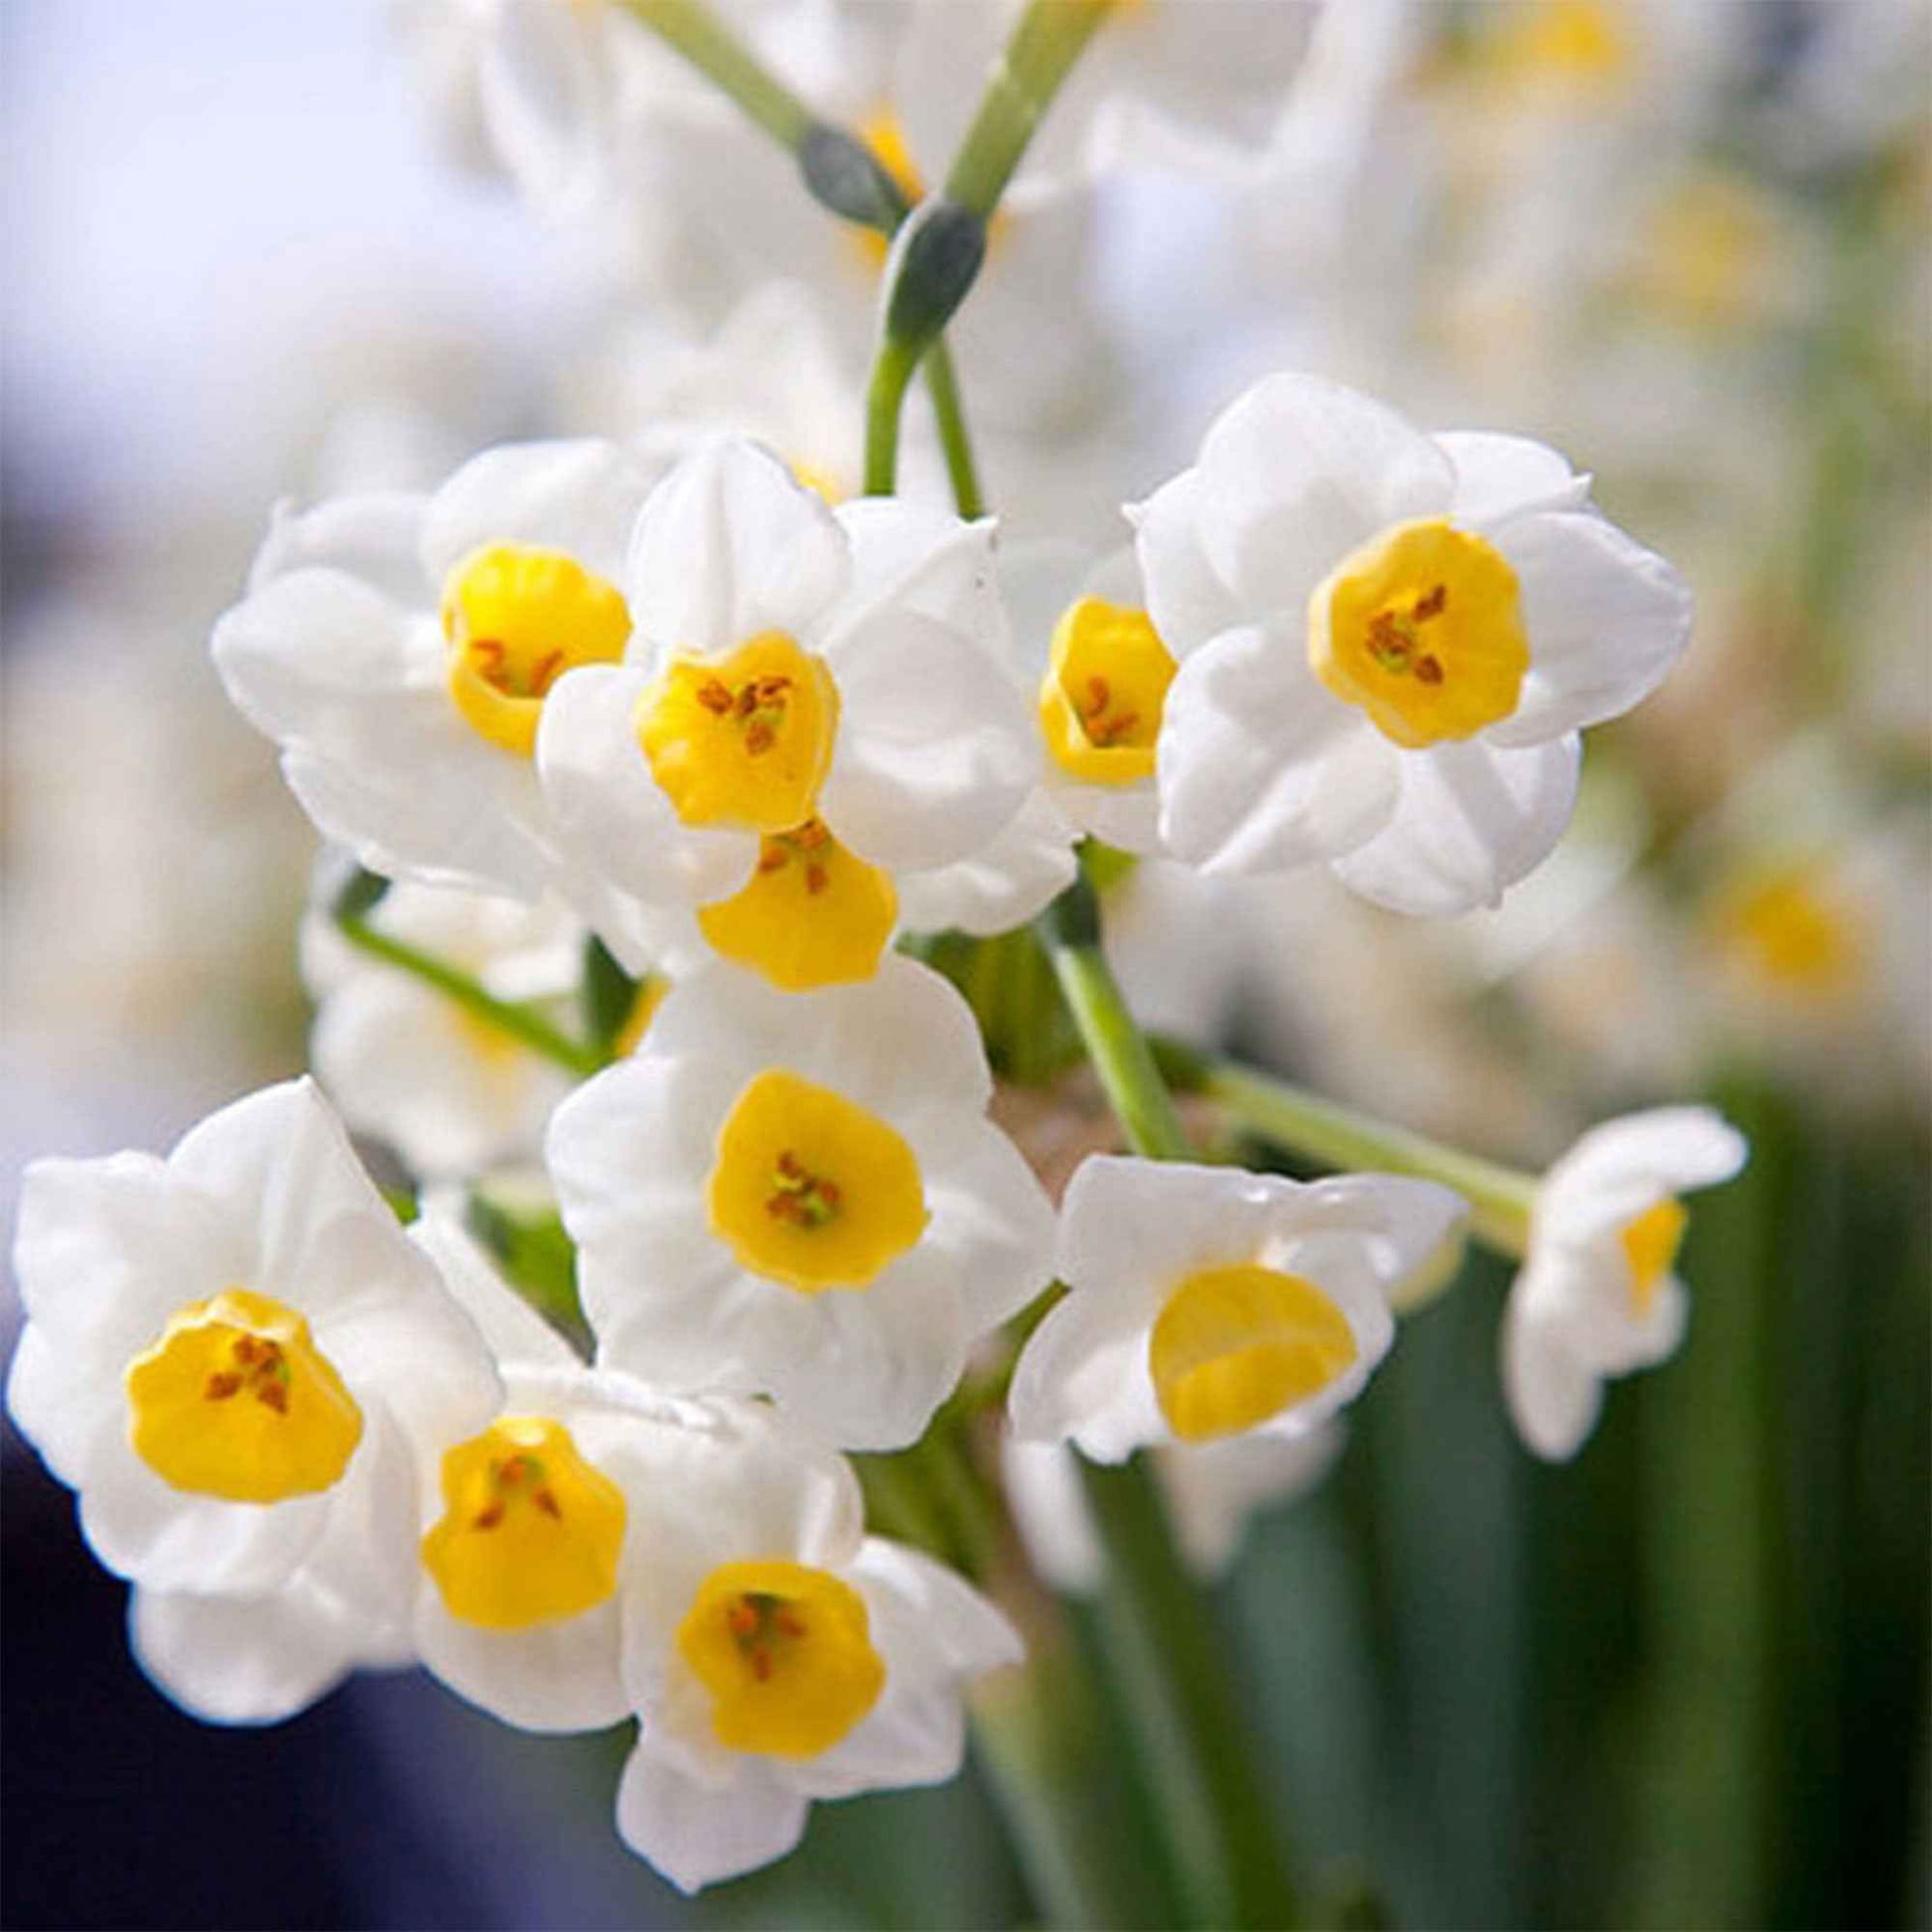 5x Narcis Narcissus 'Avalanche' wit-geel - Bloembollen